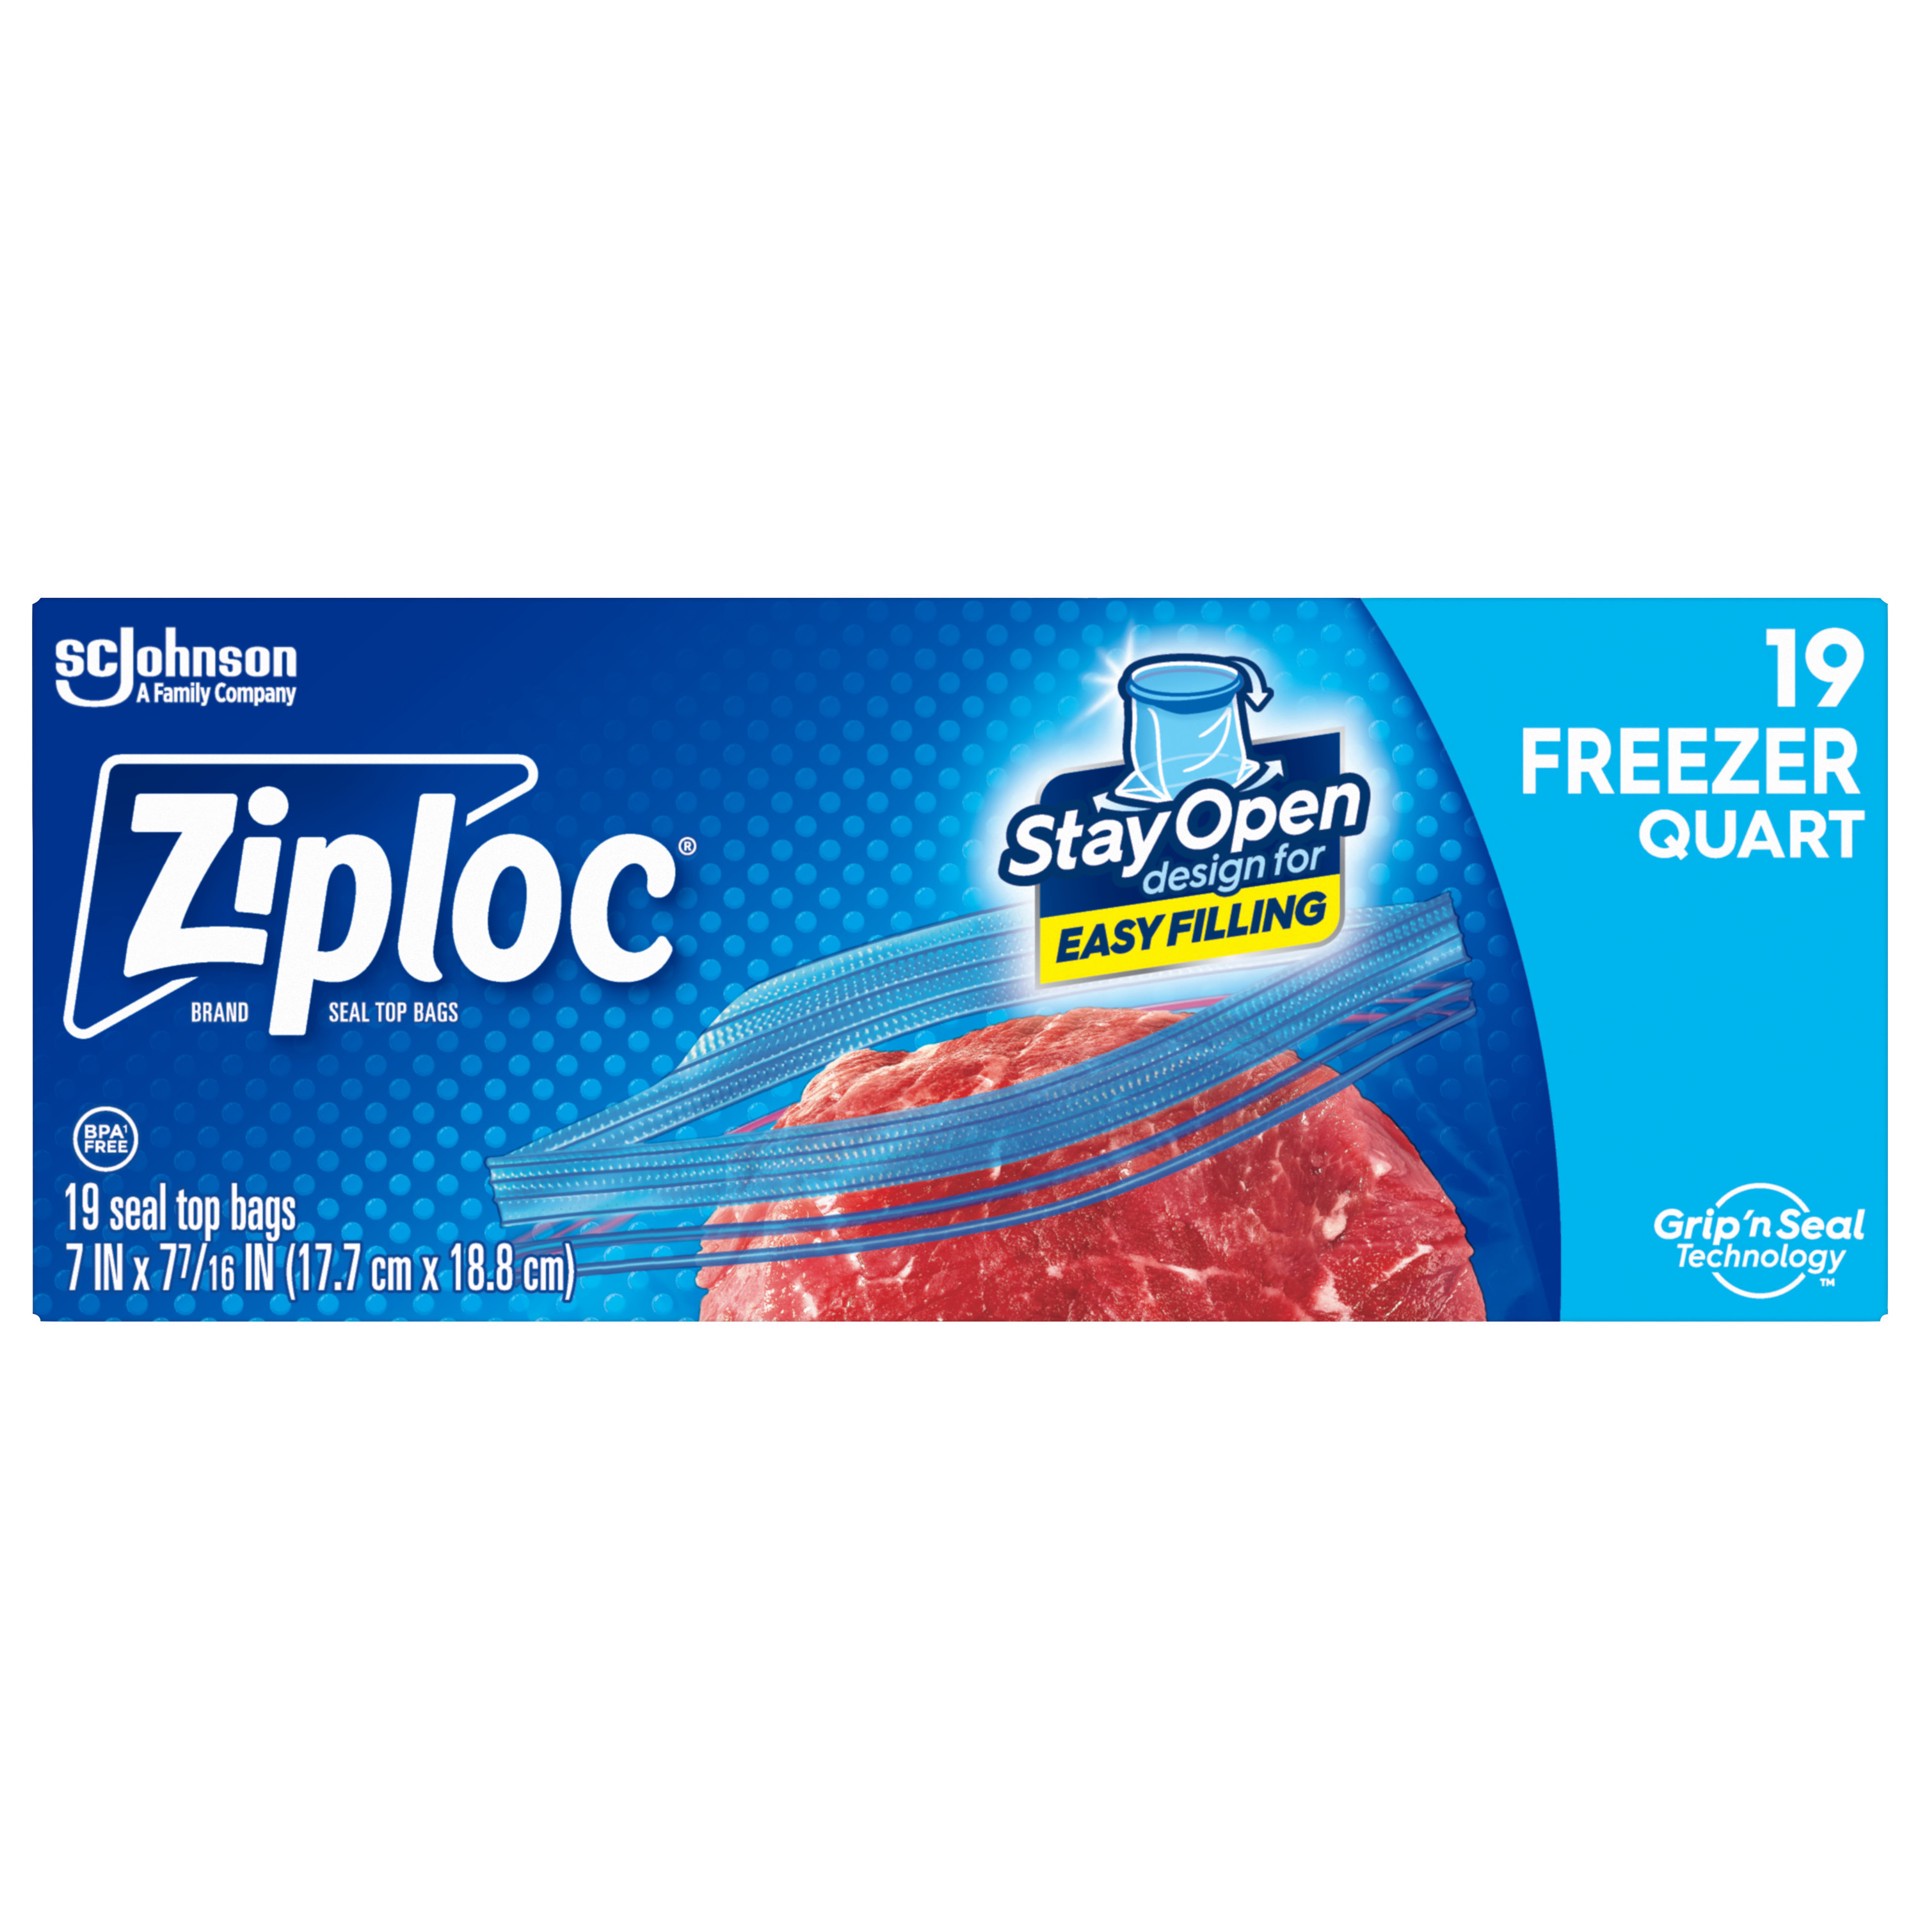 slide 1 of 7, Ziploc Brand Freezer Bags with New Stay Open Design, Quart, 19, Patented Stand-up Bottom, Easy to Fill Freezer Bag, Unloc a Free Set of Hands in the Kitchen, Microwave Safe, BPA Free, 19 ct